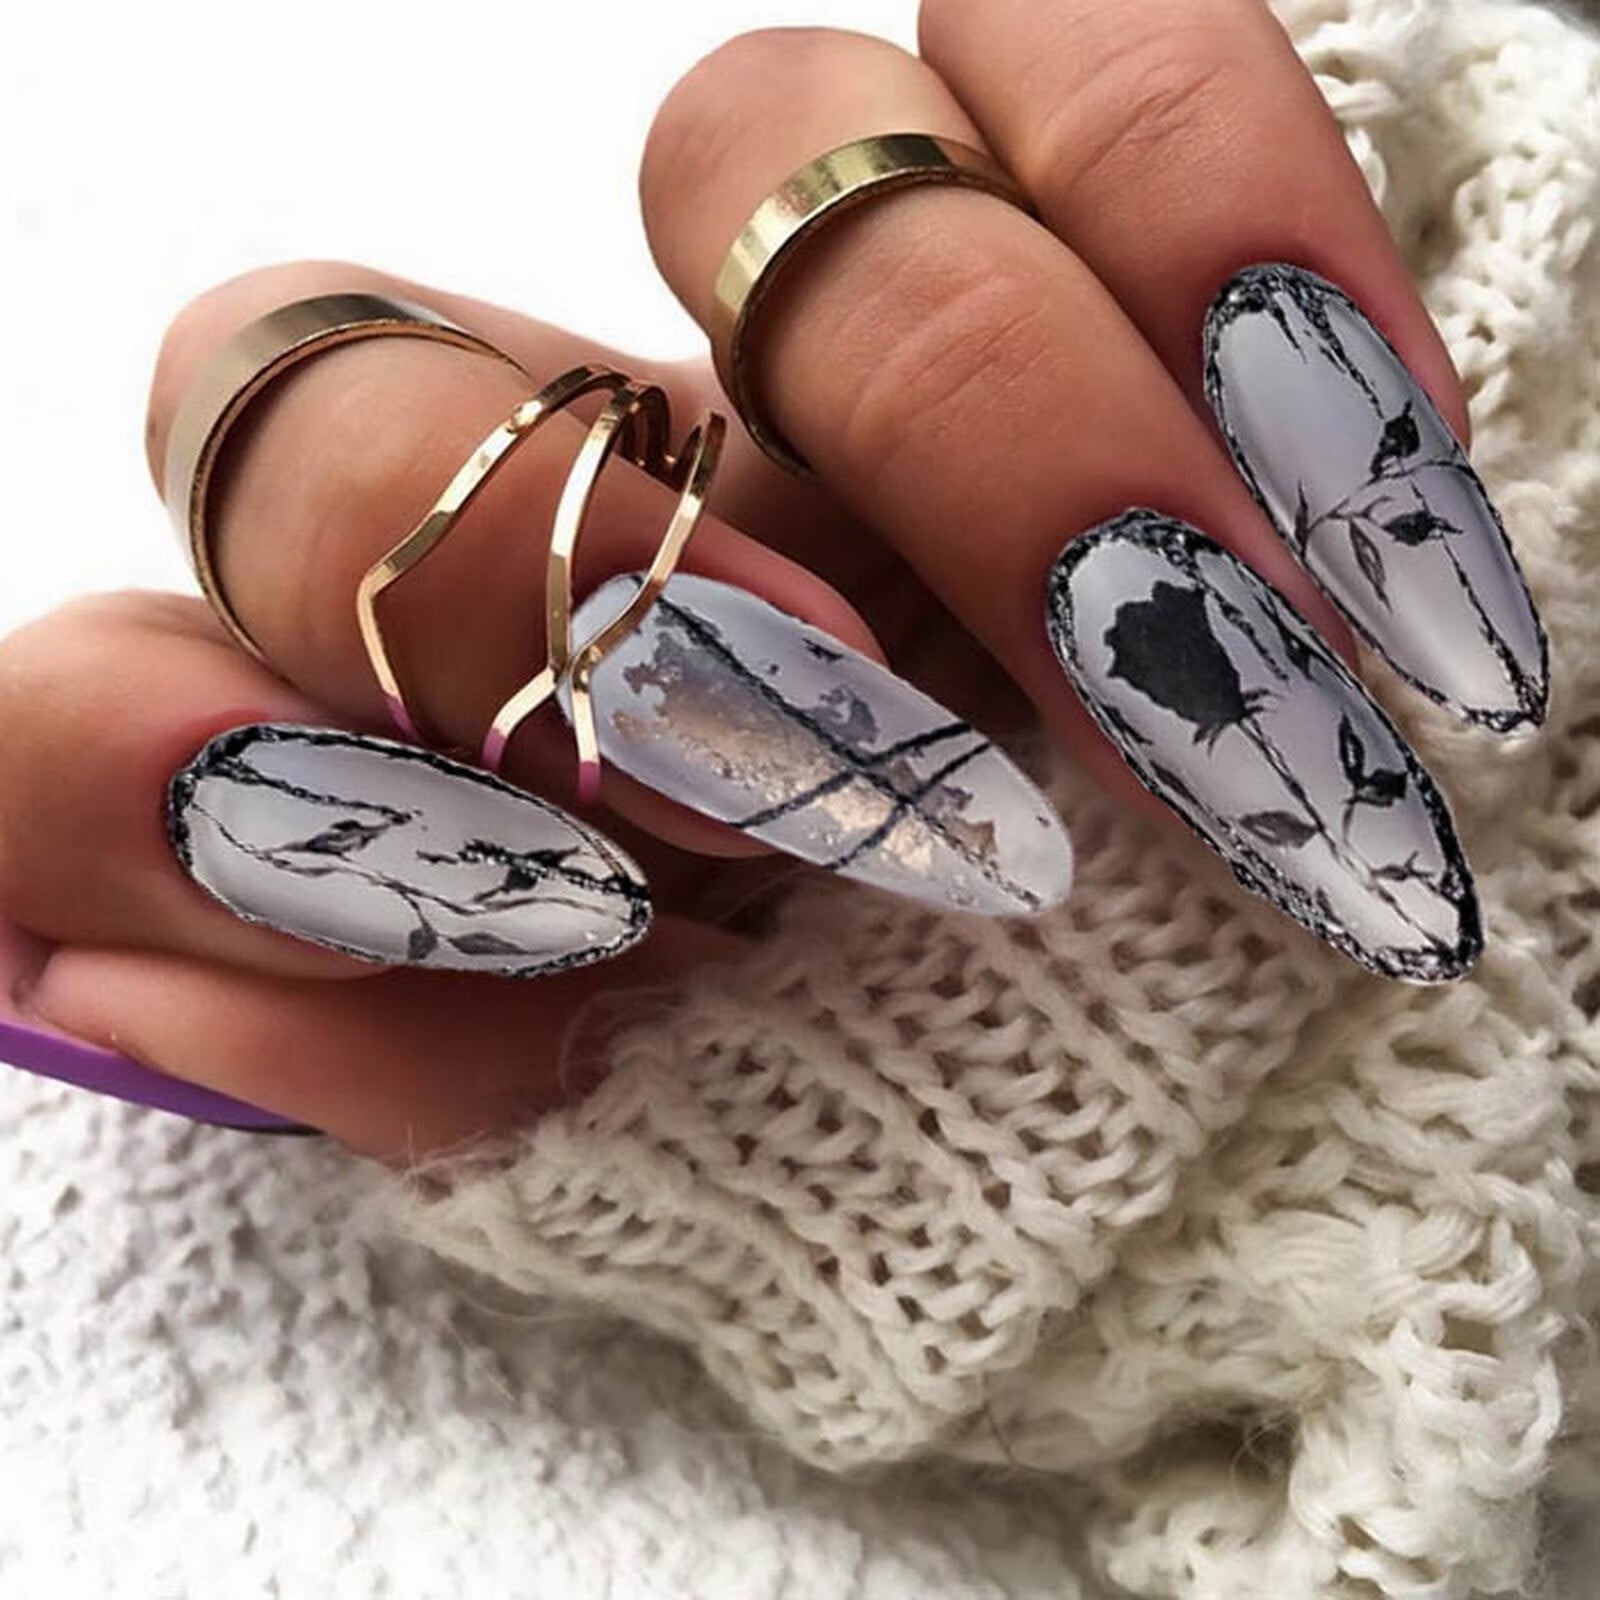 Nail Stickers Make These 20 Back-To-School Themed Manicures Insanely Easy